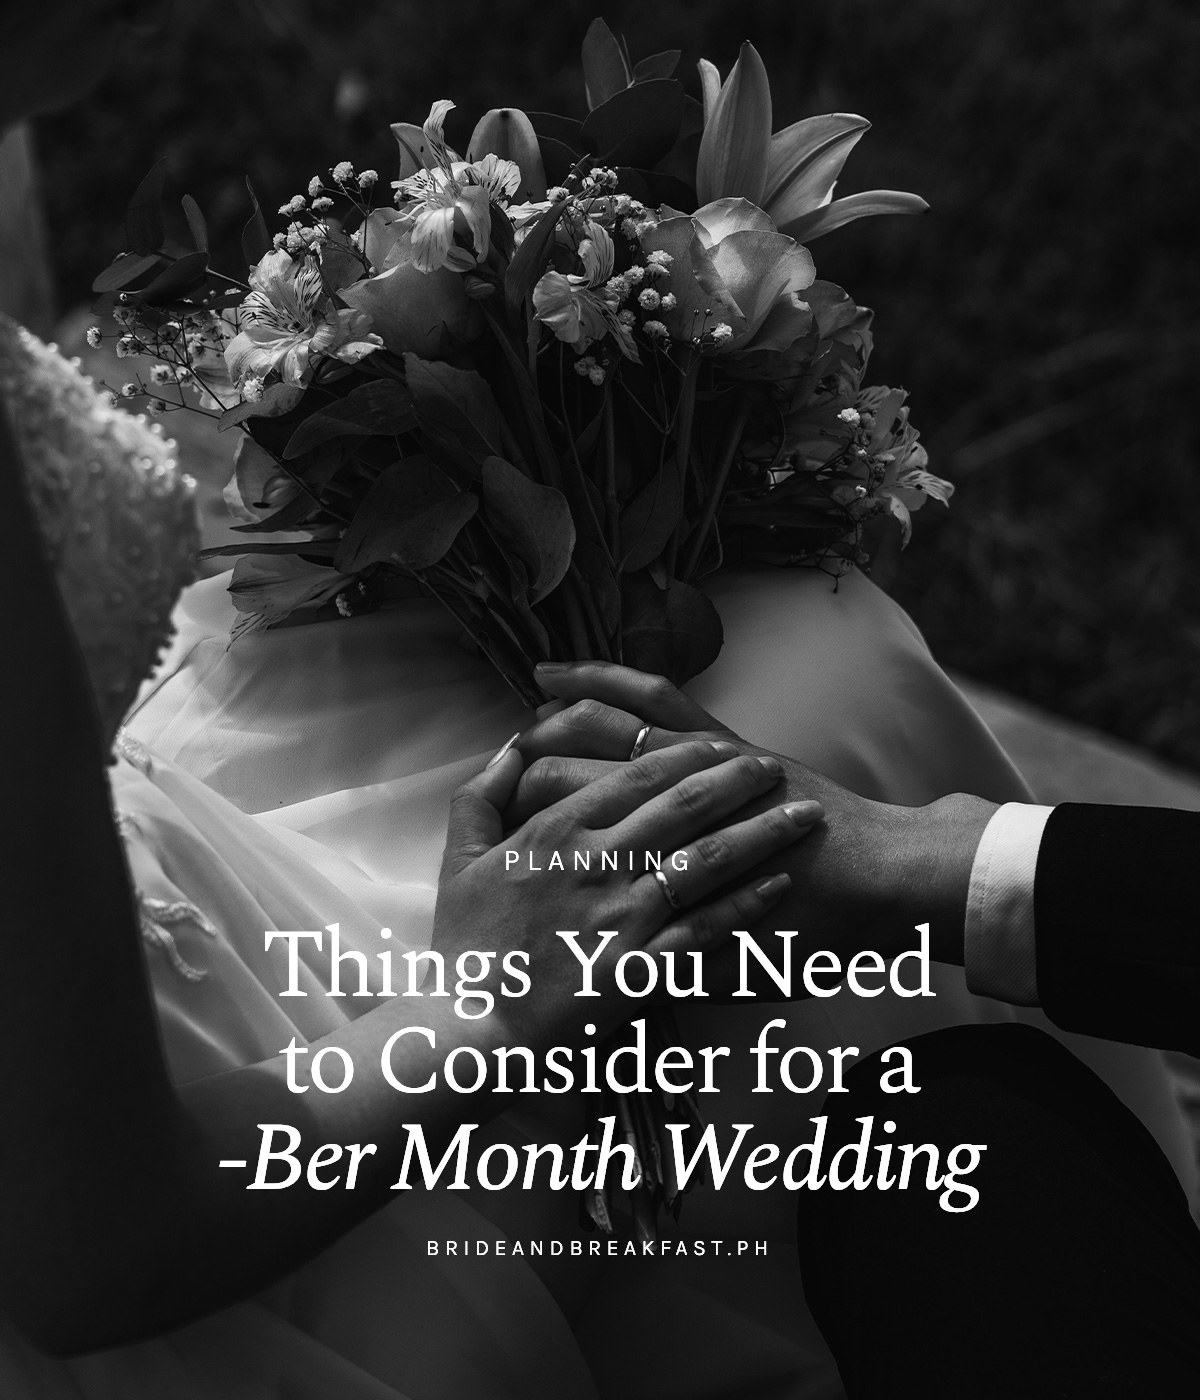 Things You Need to Consider for a -Ber Month Wedding